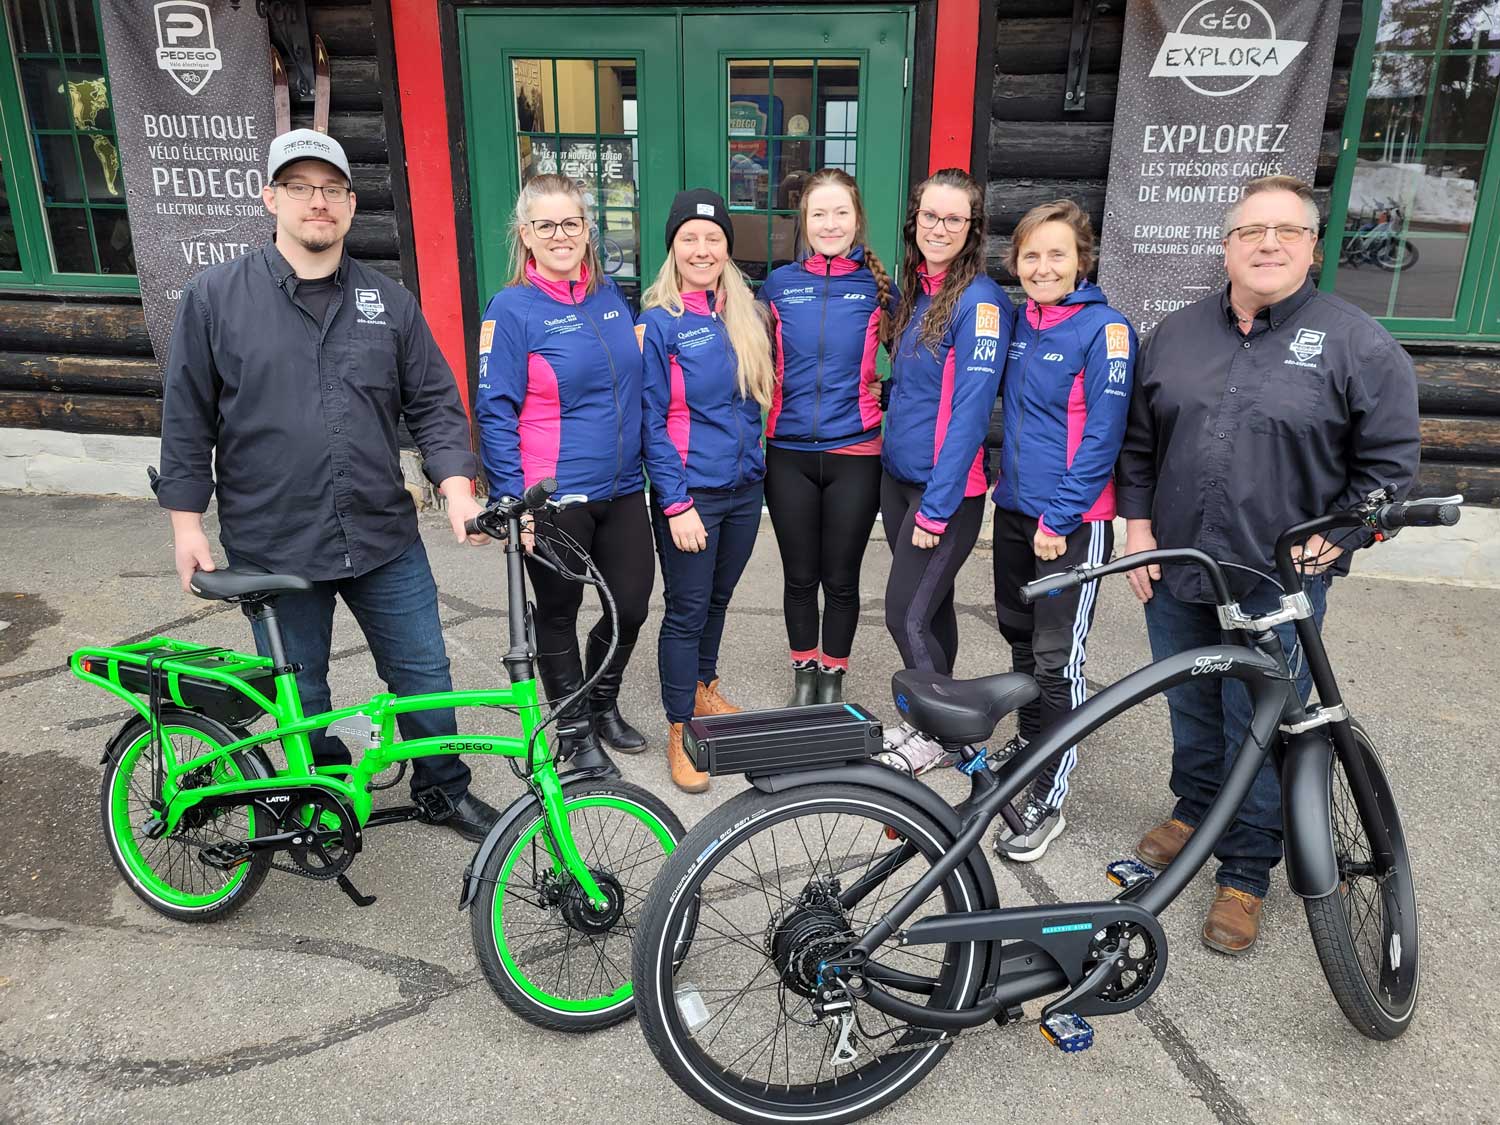 Pedego store owners with two bikes donated to a cycling team for raffle.